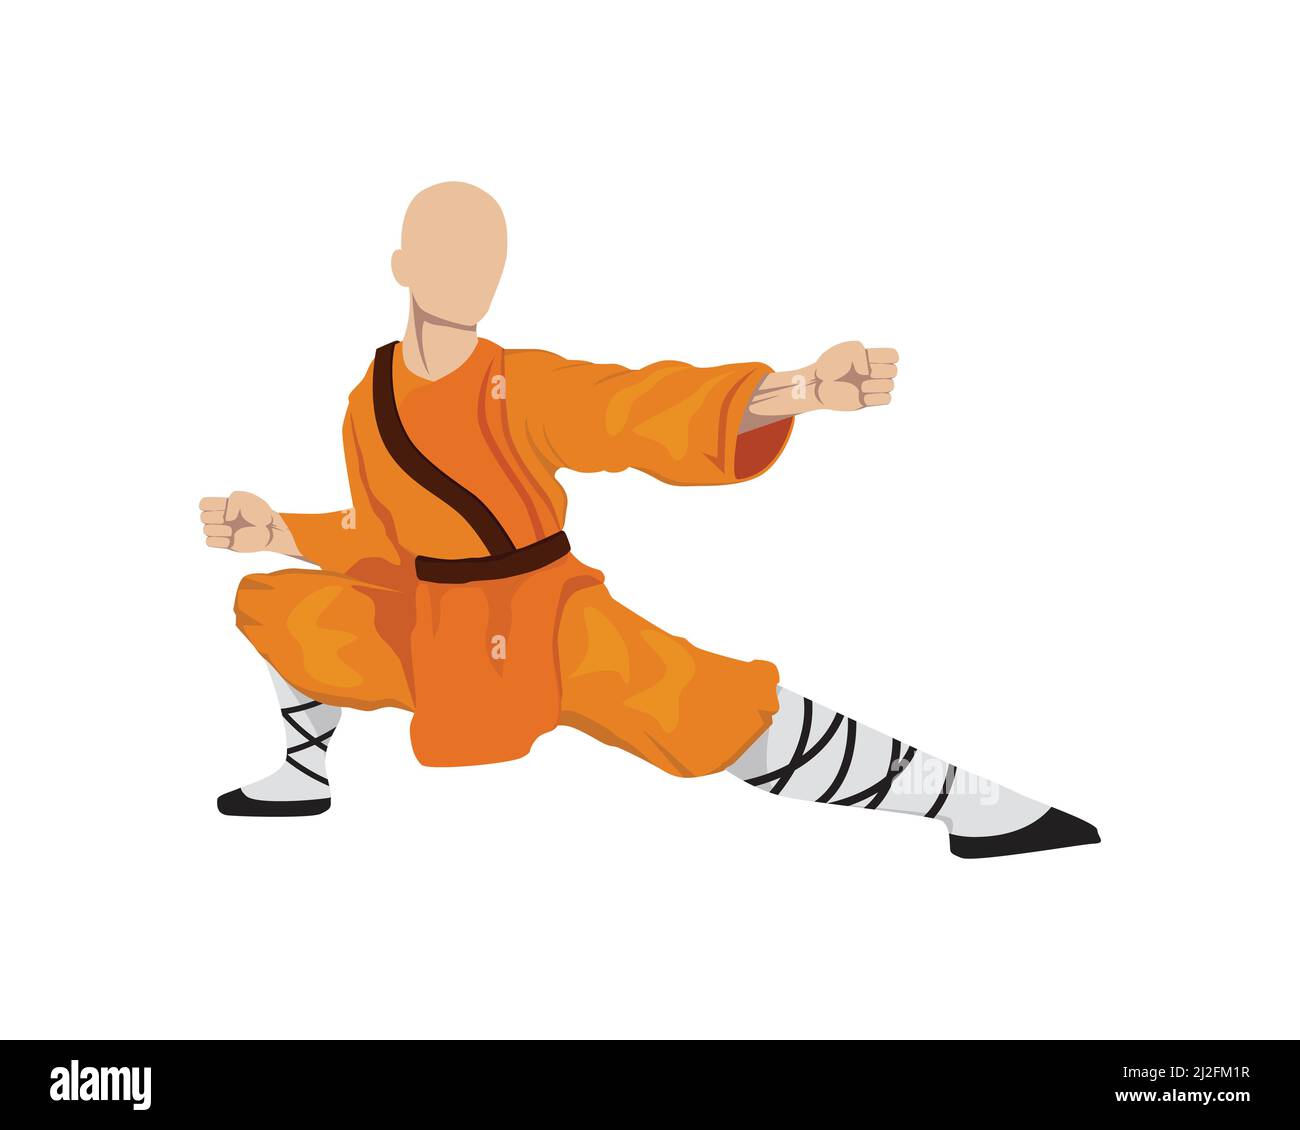 Shaolin Monk with Kung Fu Move Illustration Vector Stock Vector